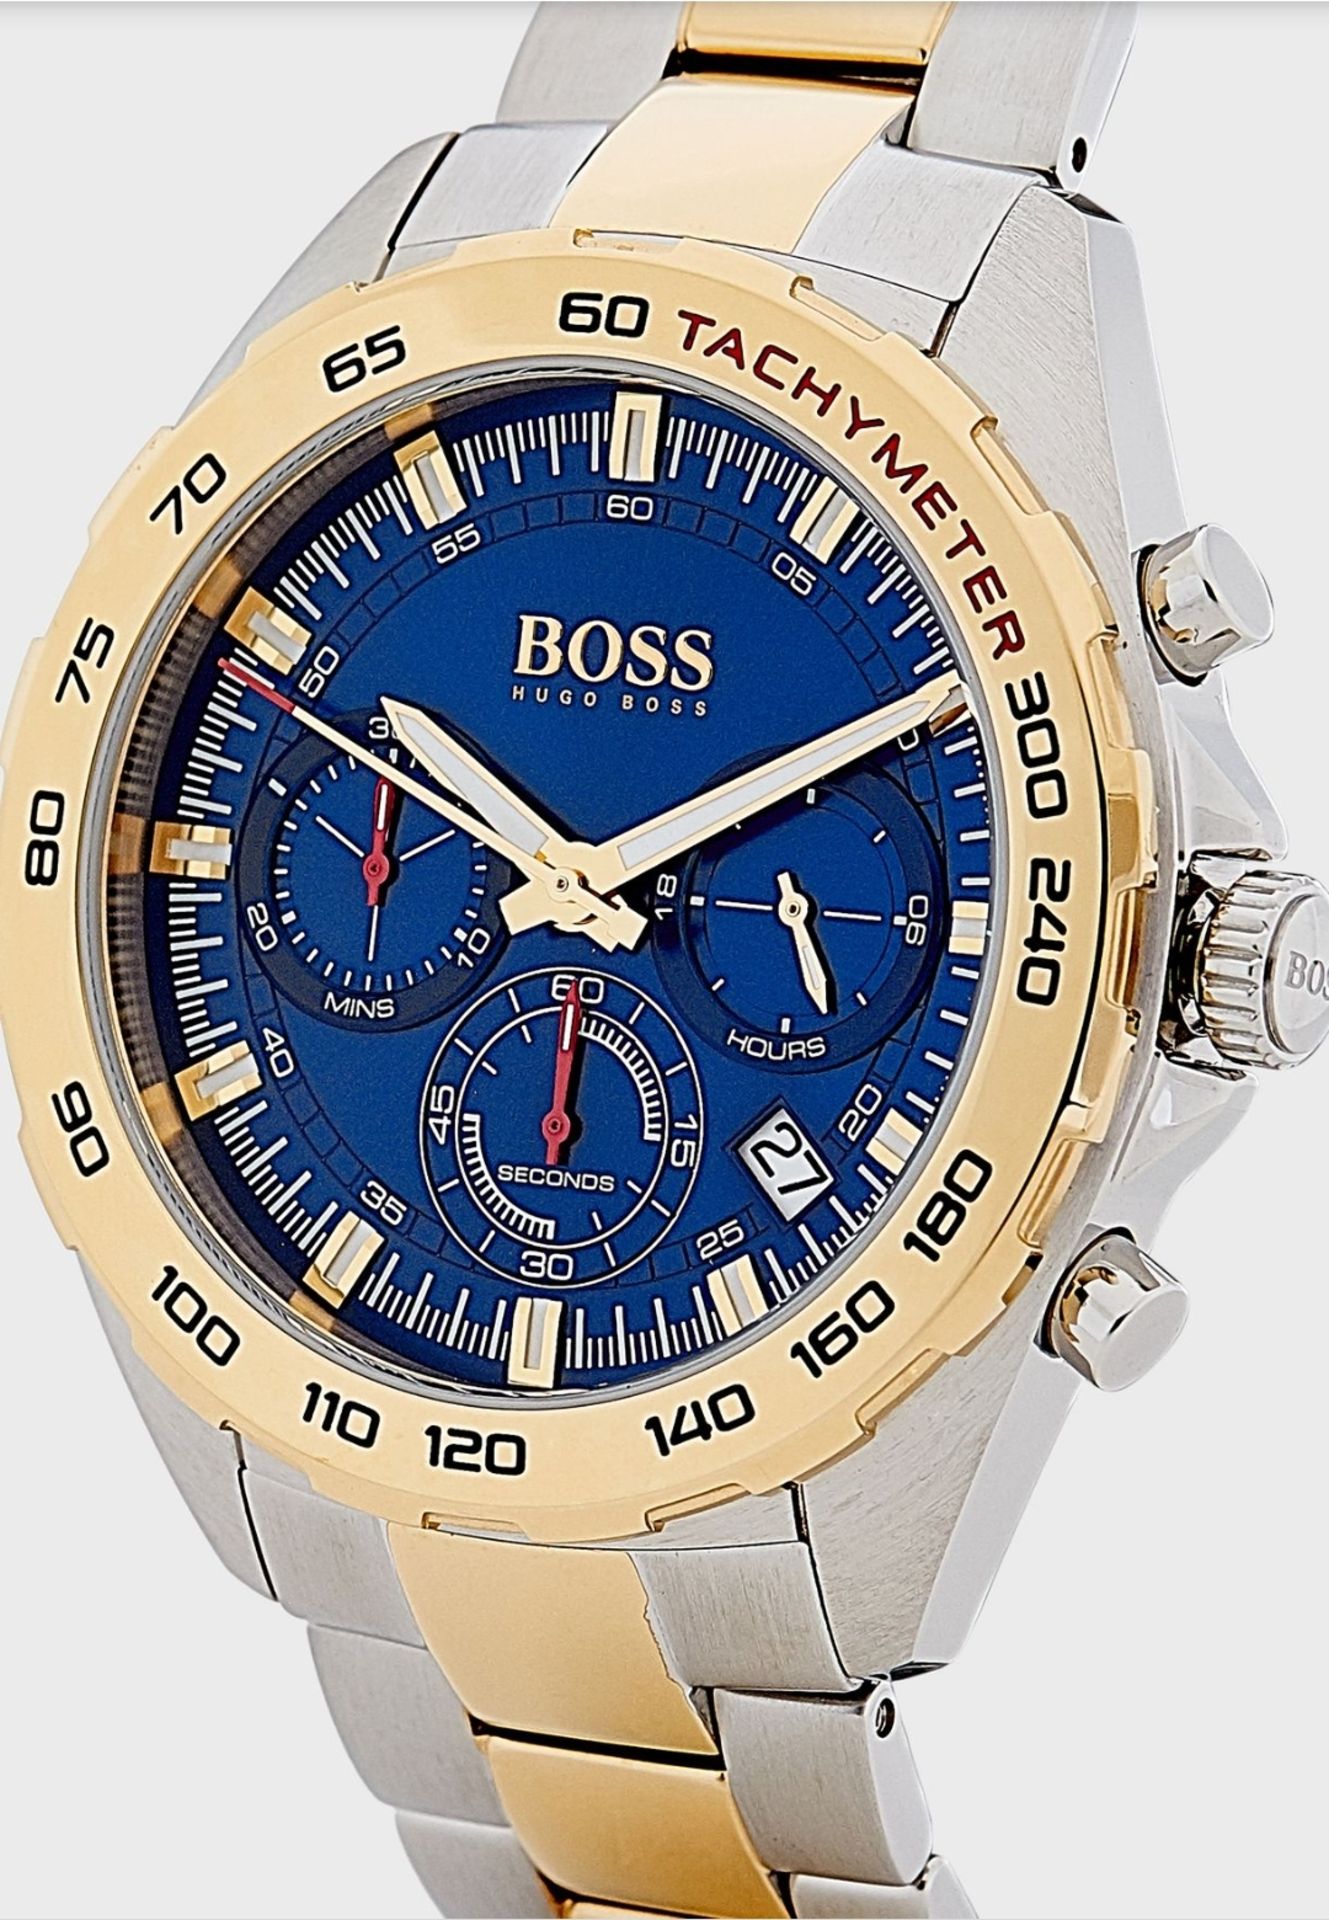 Hugo Boss 1513667 Men's Sport Intensity Two Tone Gold & Silver Chronograph Watch - Image 4 of 5